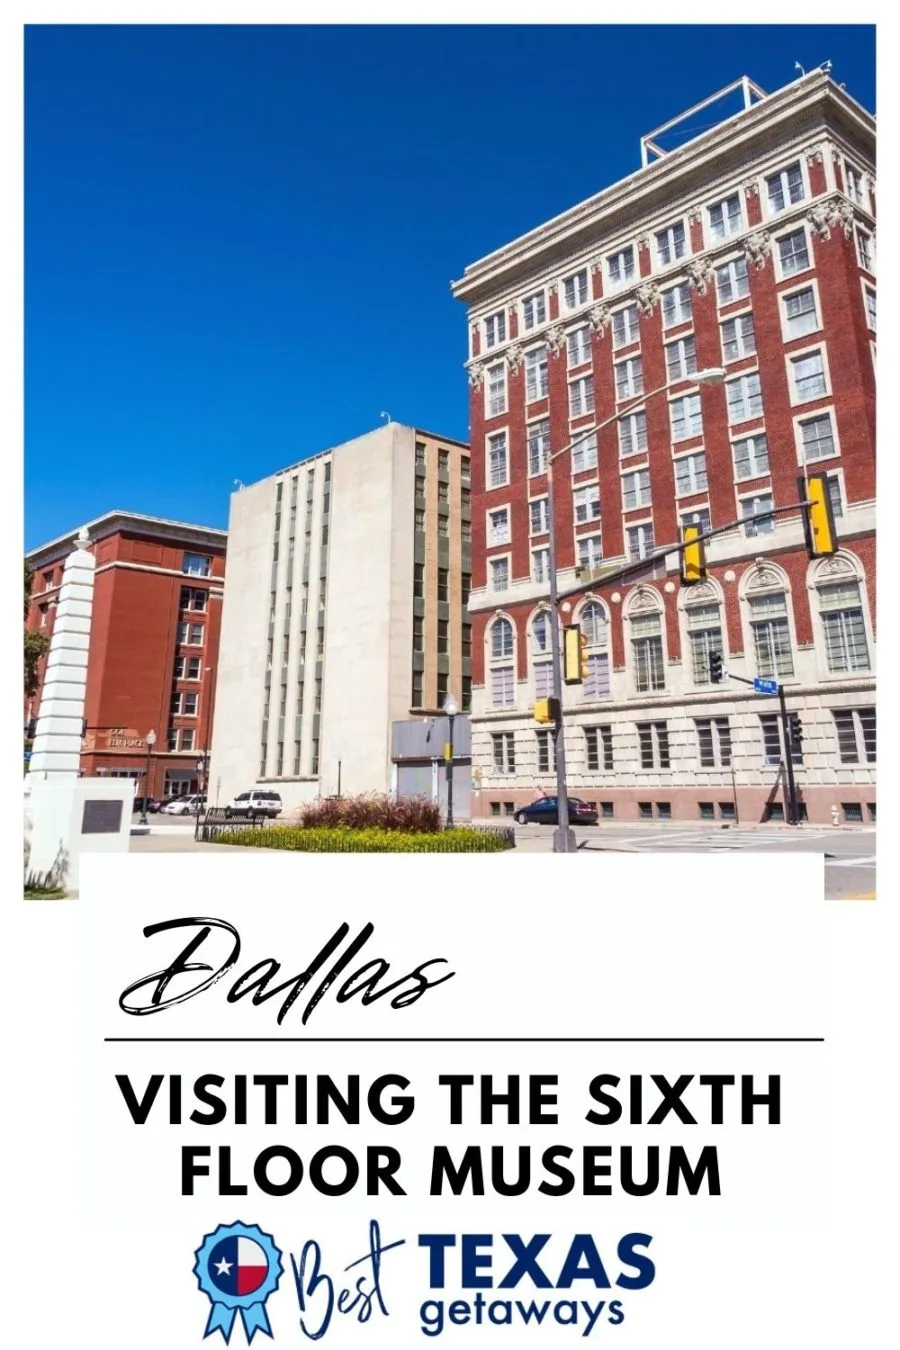 Visit The Sixth Floor Museum at Dealey Plaza, Dallas, Texas